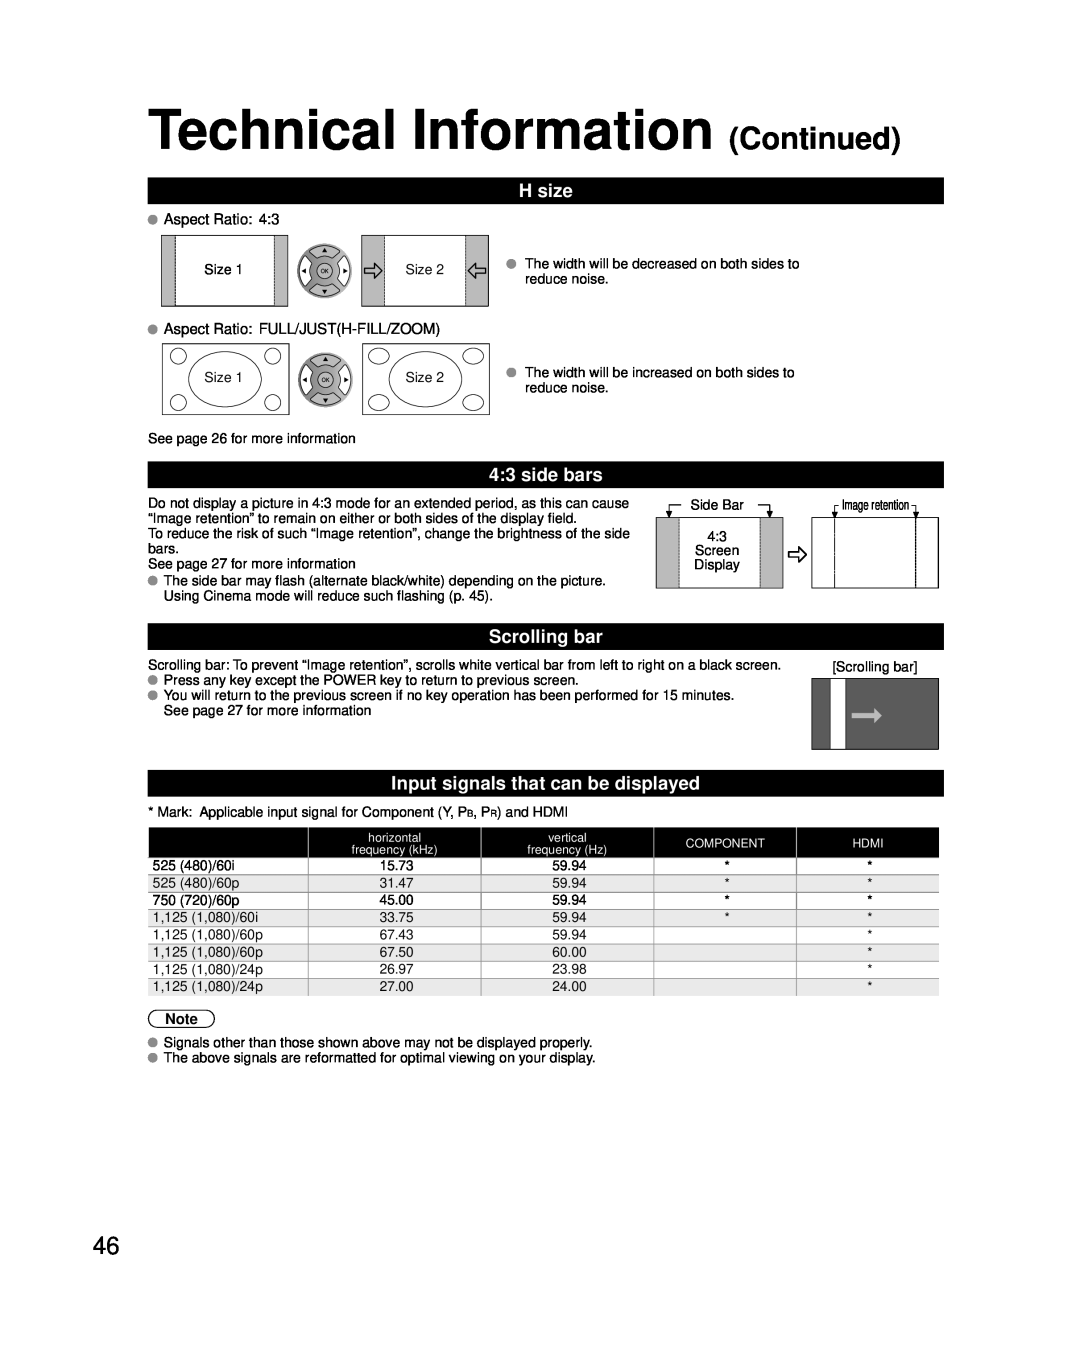 Panasonic TC-P42U2 Technical Information Continued, H size, side bars, Scrolling bar, Input signals that can be displayed 